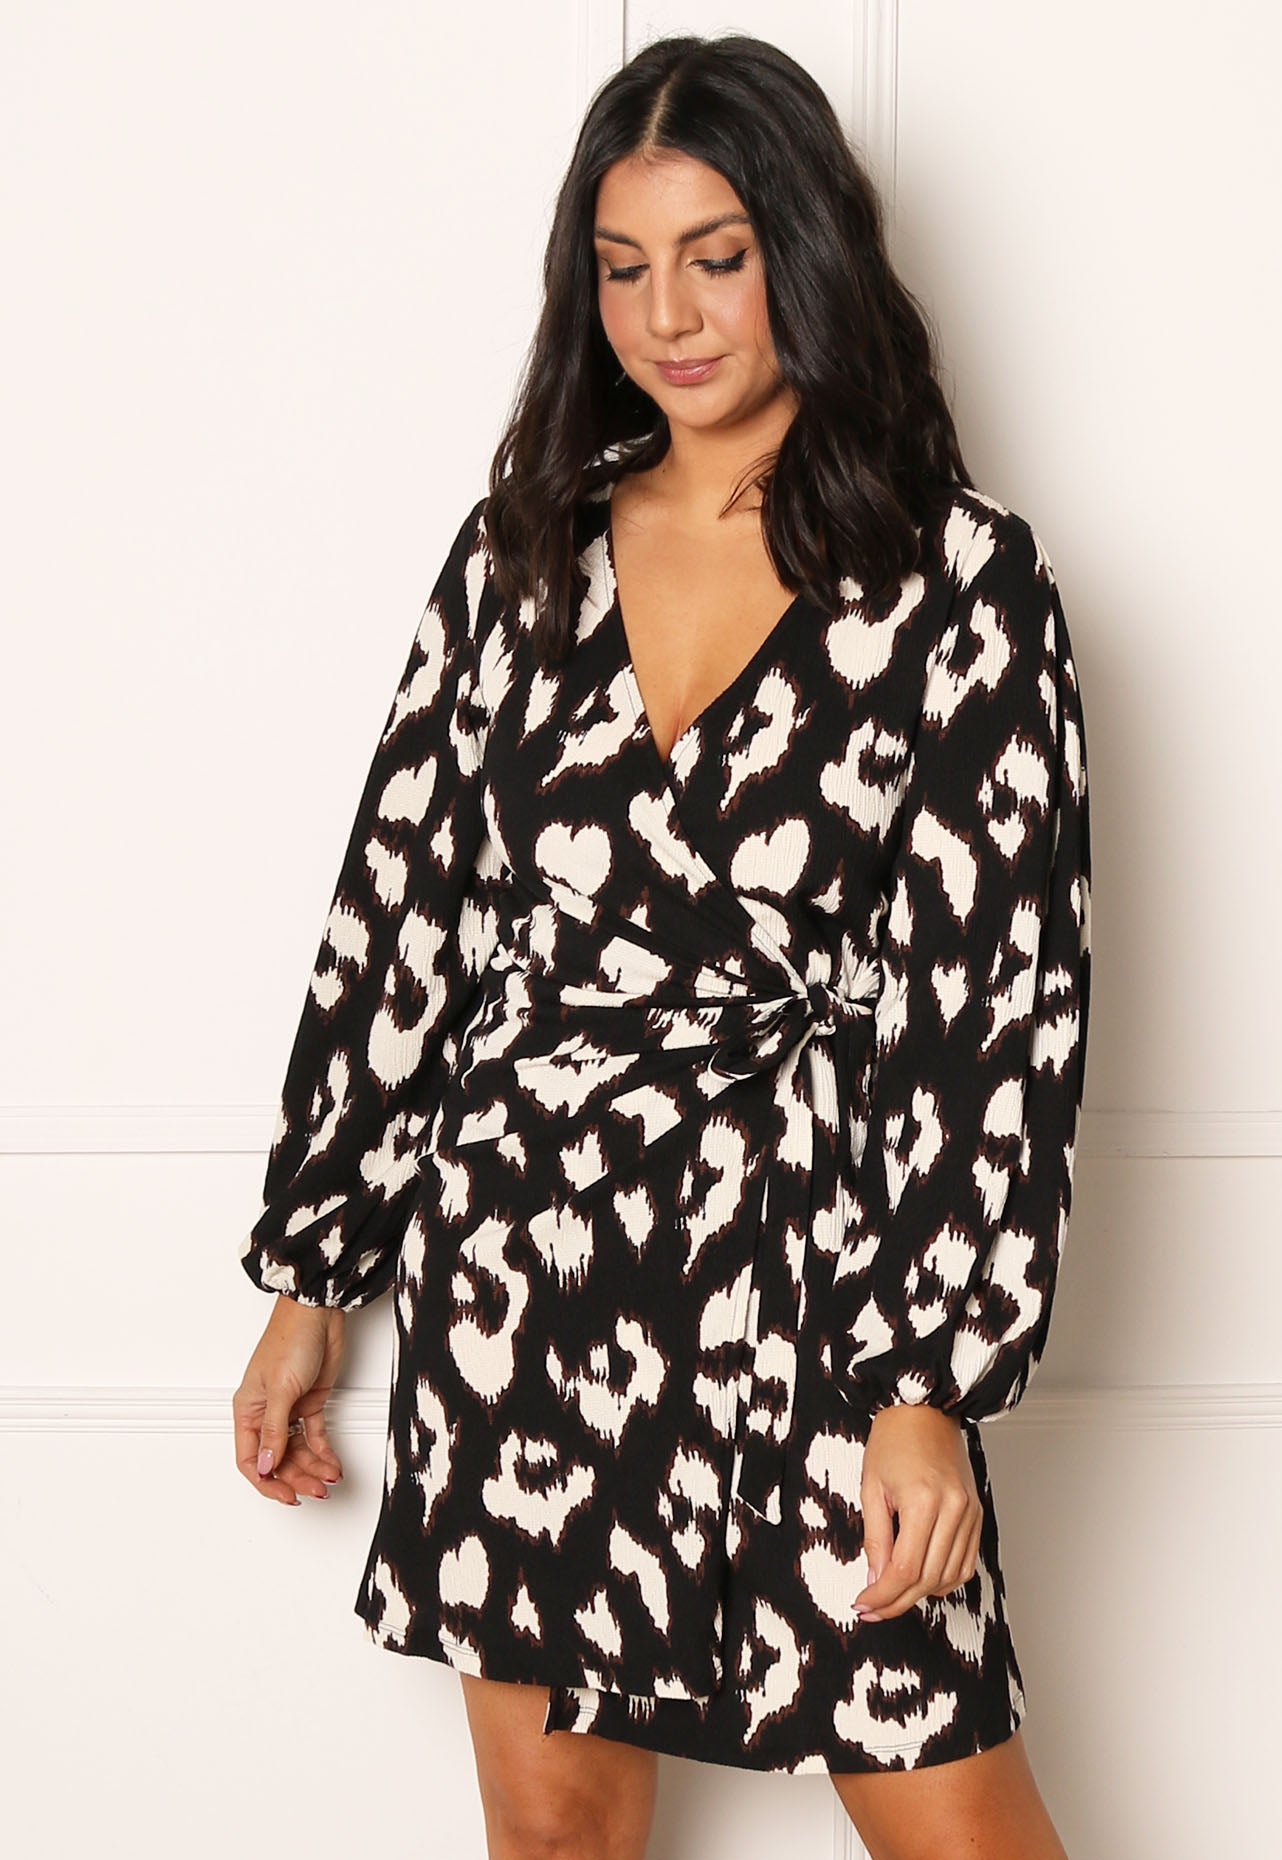 VILA Perry Leopard Print Mini Wrap Dress in Black, Cream & Brown - One Nation Clothing